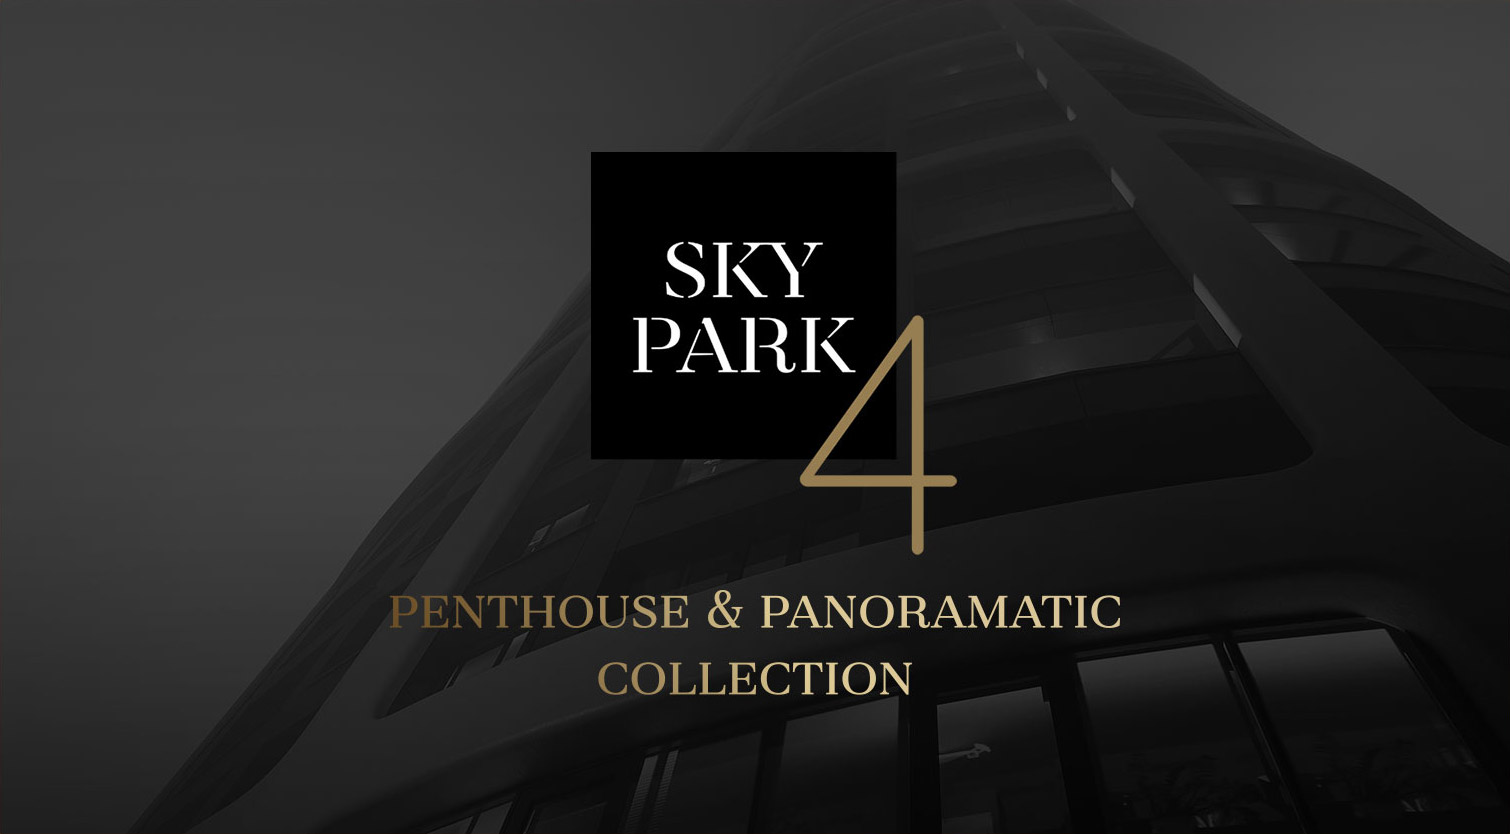 Penthouse & Panoramatic Collection